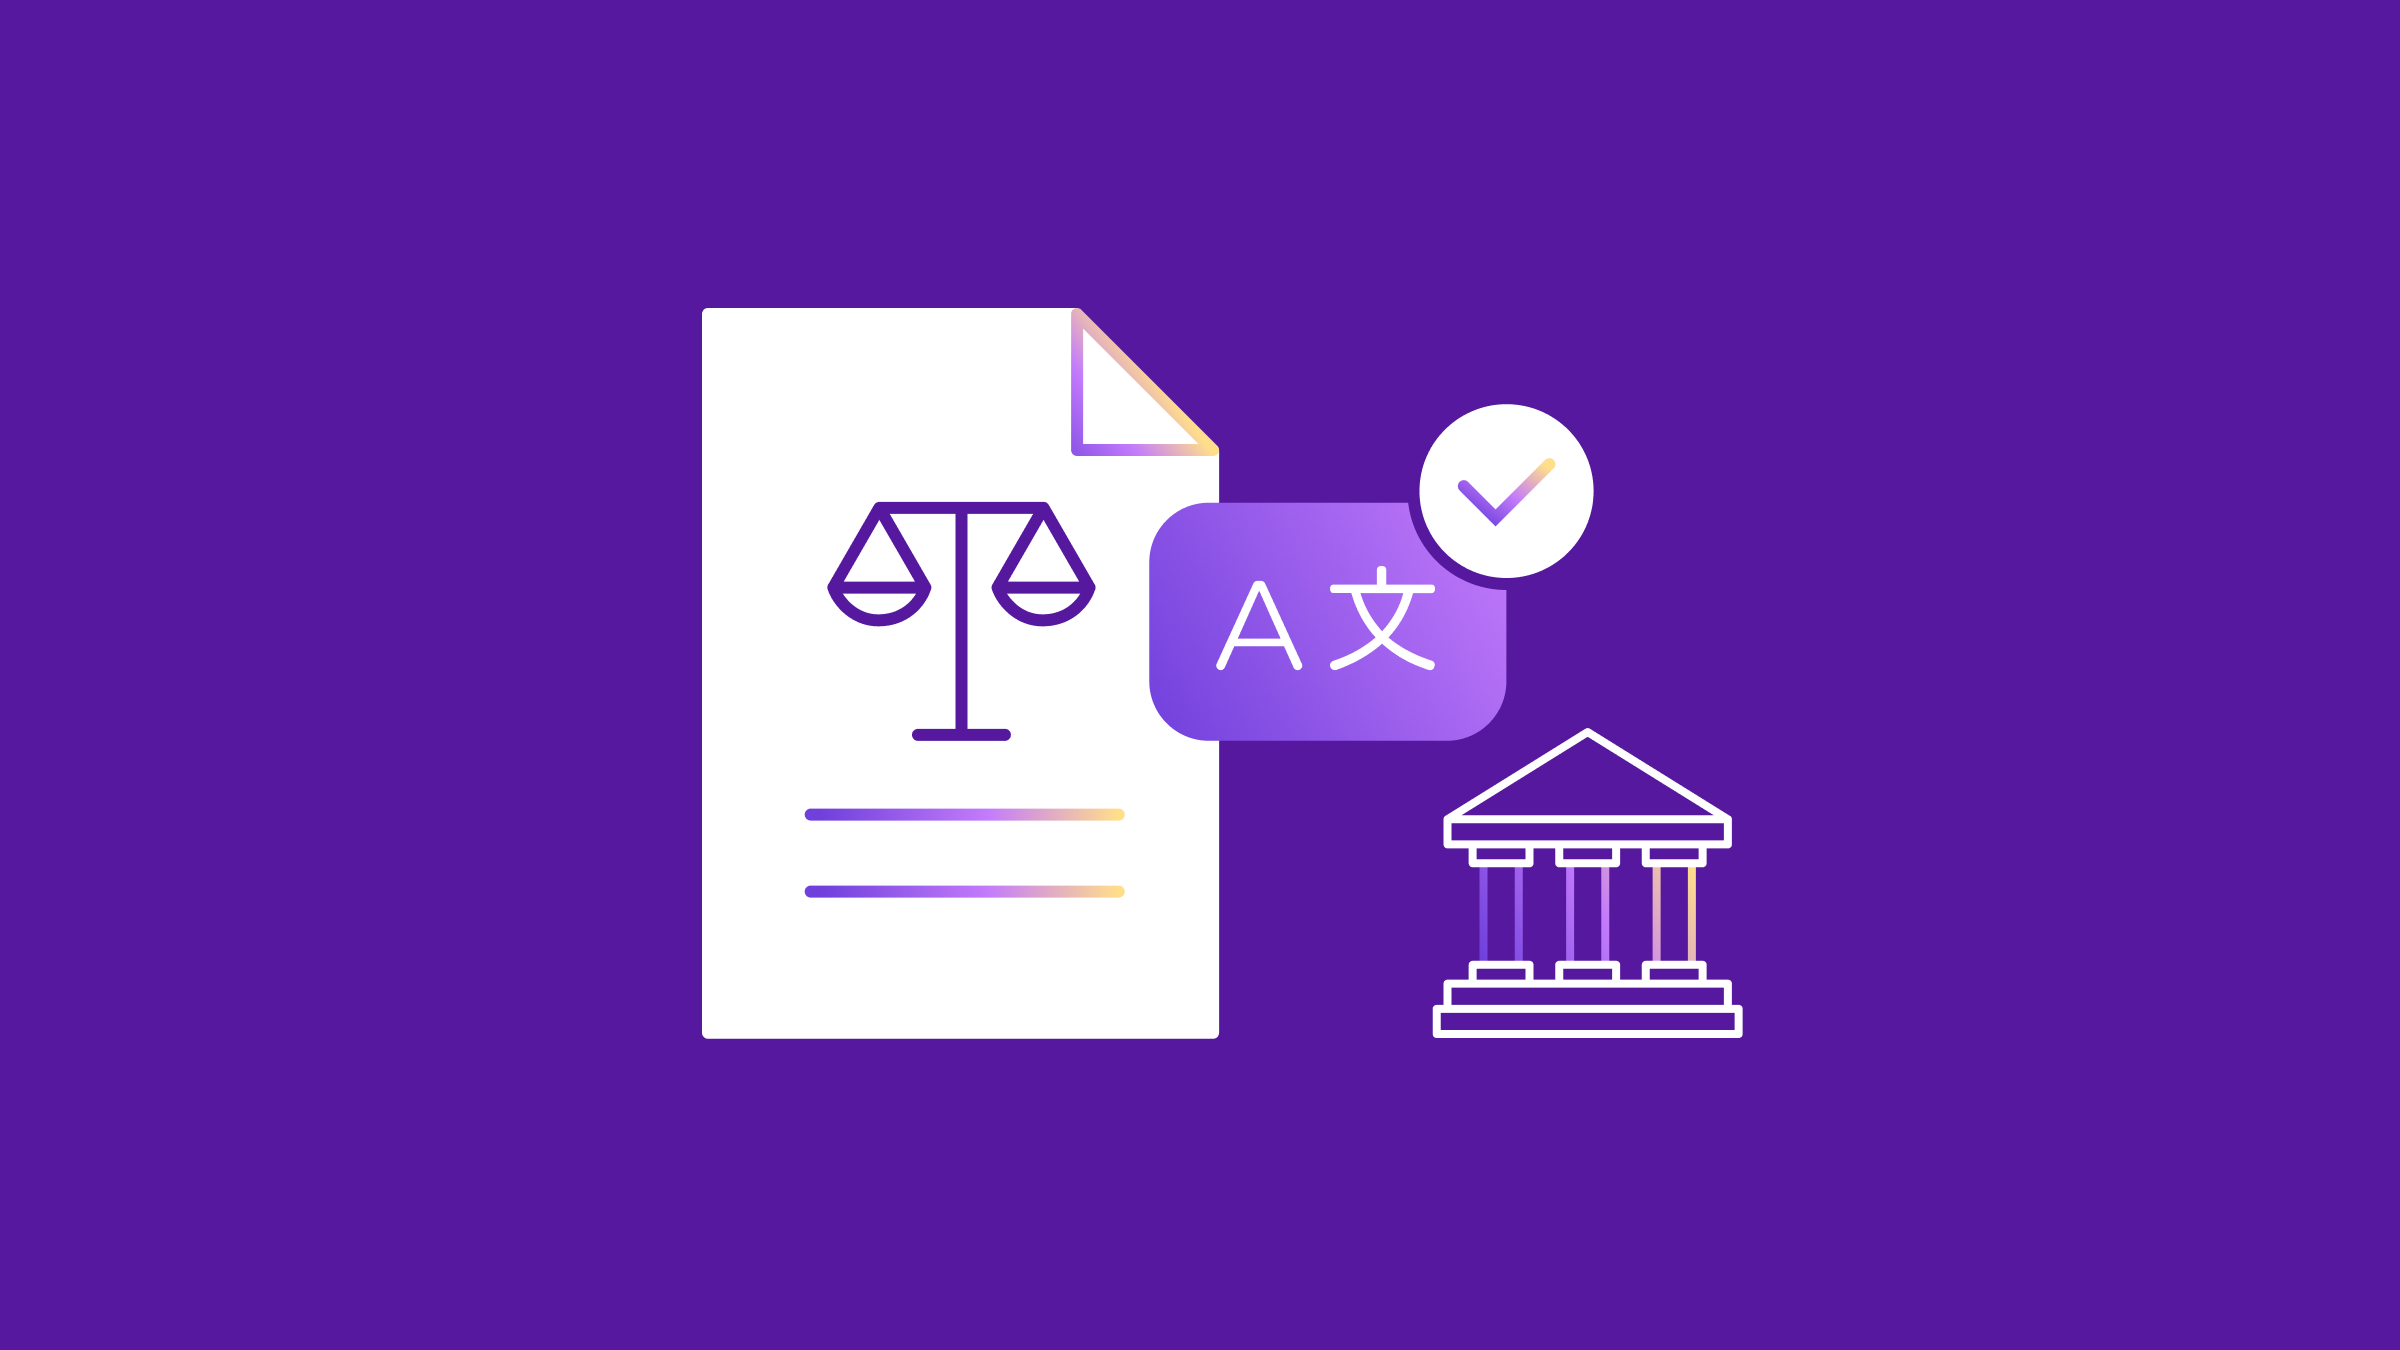 In the market for legal translation services? Get an overview of 5 go-to service providers, as well as tips on how to pick the best one for your needs. 